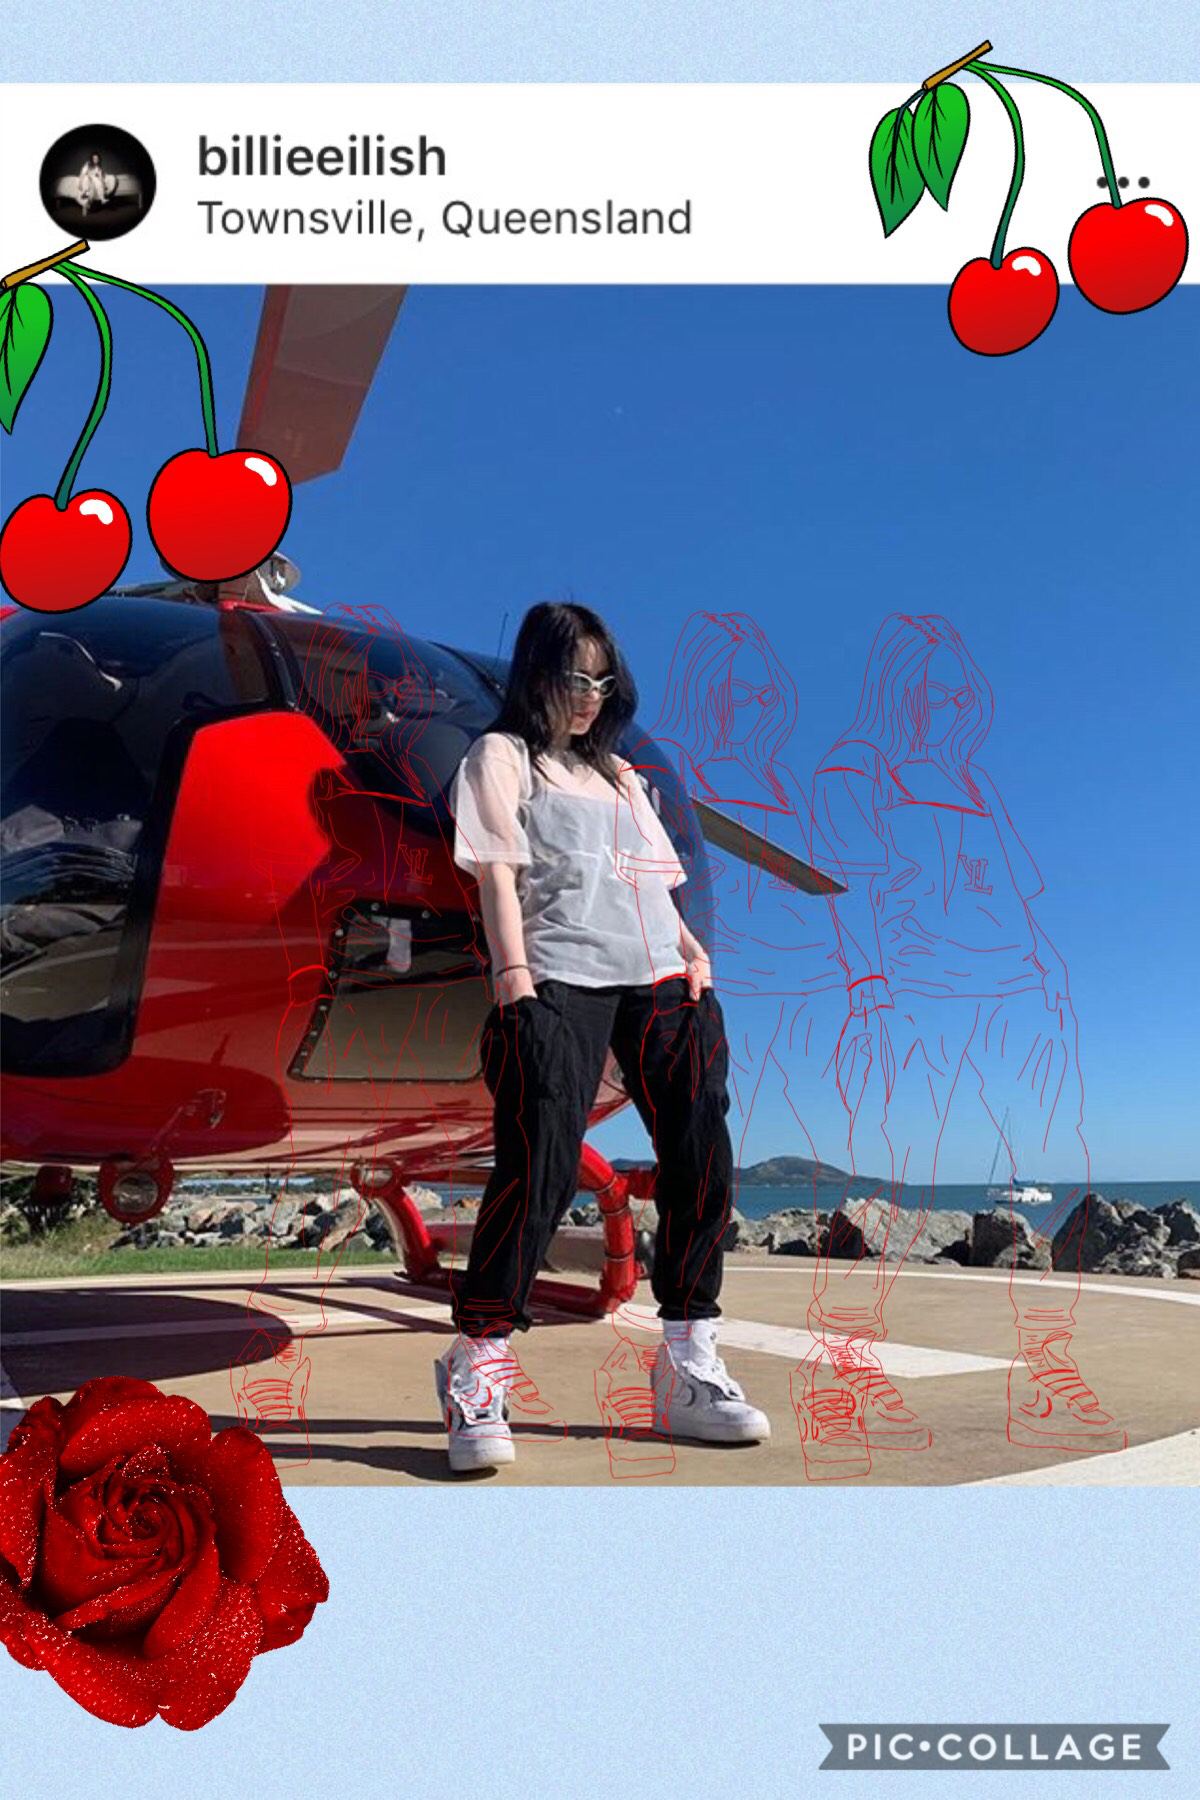 🌹🍒tap🍒🌹

song of the day:
xanny
artist: Billie Eilish